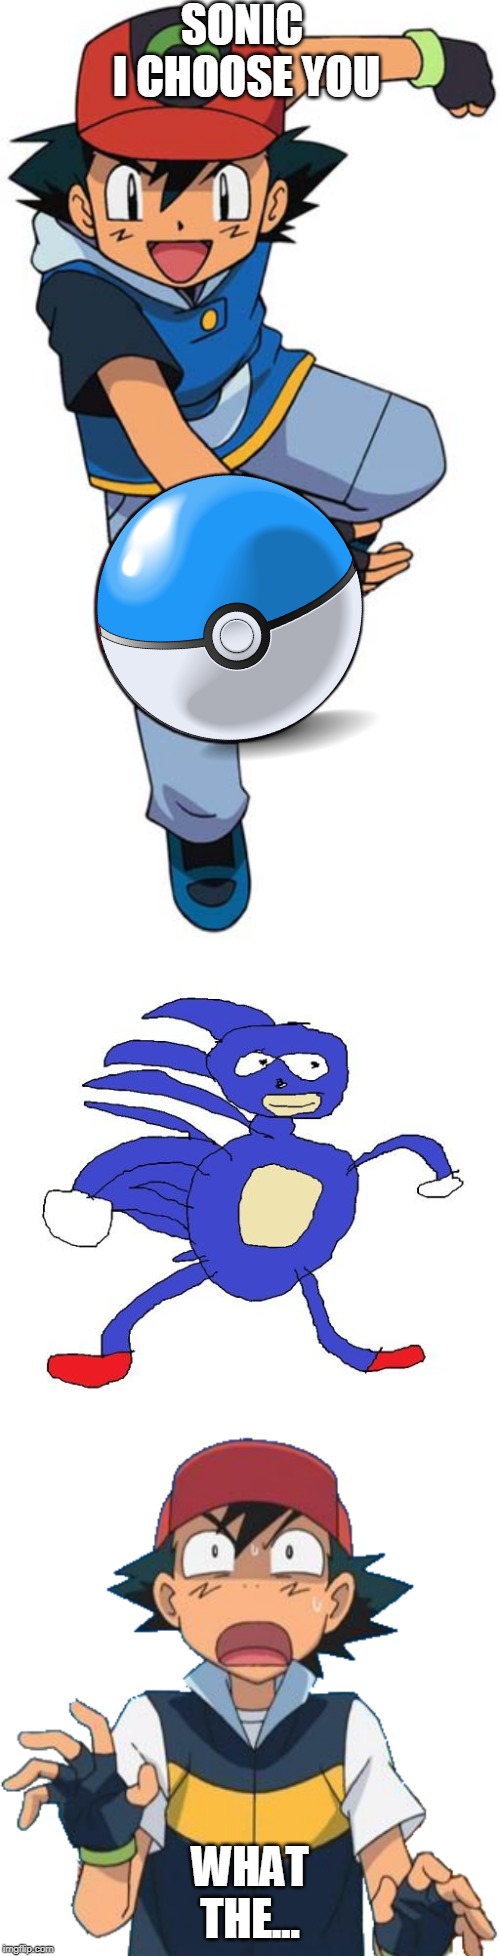 SONIC 
I CHOOSE YOU; WHAT THE... | image tagged in sanic,memes,pokemon,sonic,ash ketchum | made w/ Imgflip meme maker